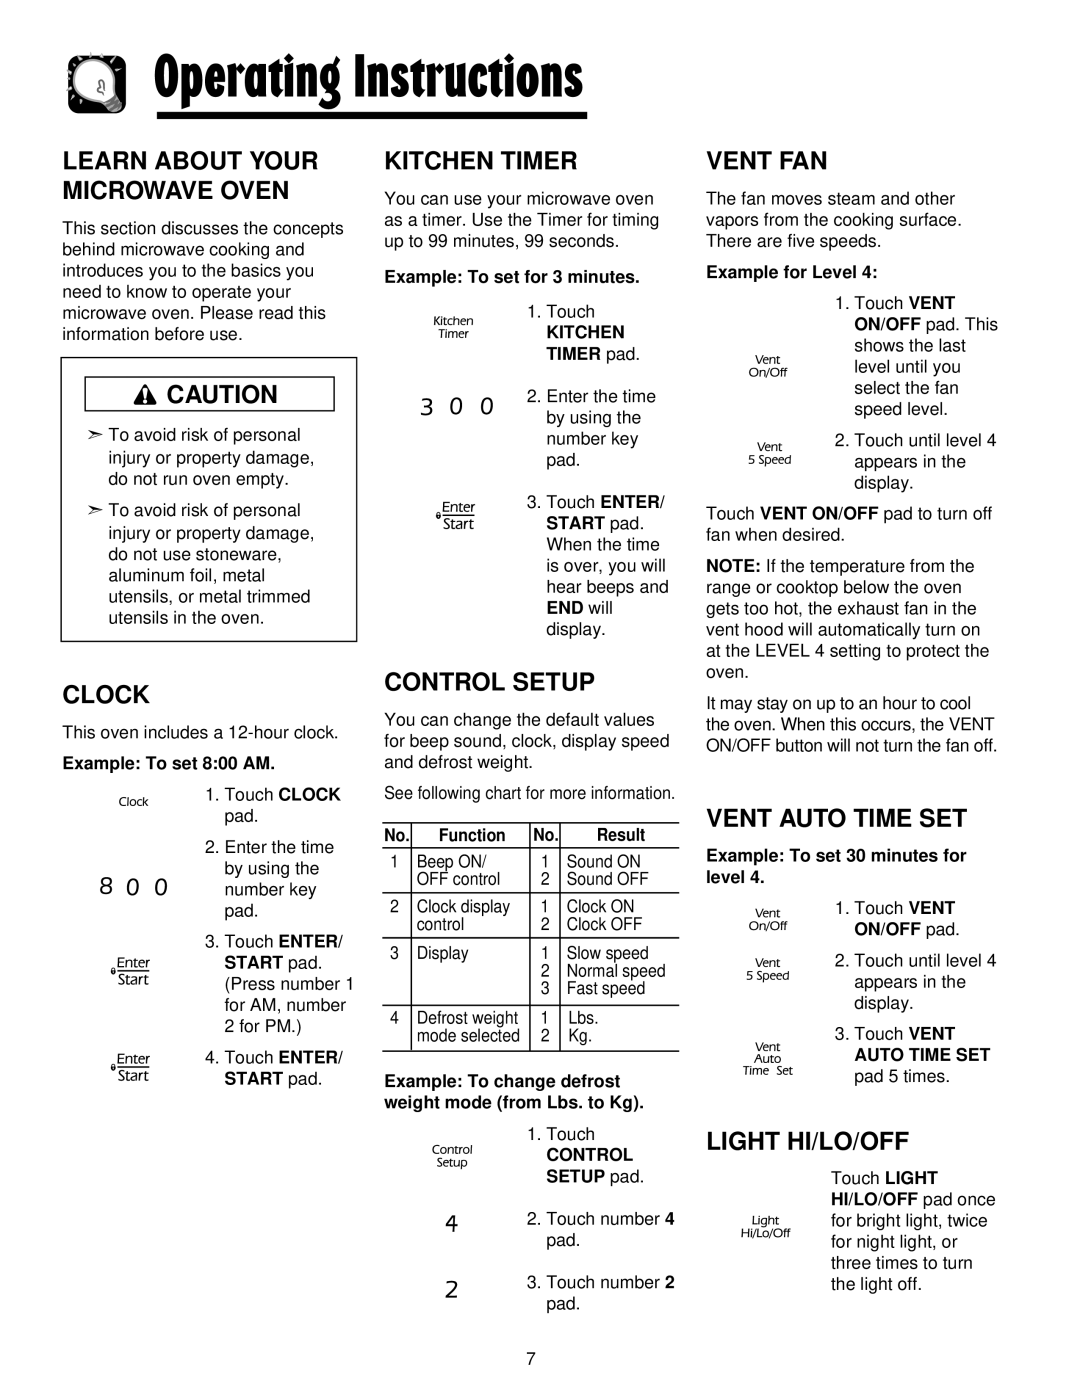 Maytag JMV8208AA/AC Operating Instructions, Learn About Your Microwave Oven, Kitchen Timer, Vent Fan, Clock, Control Setup 